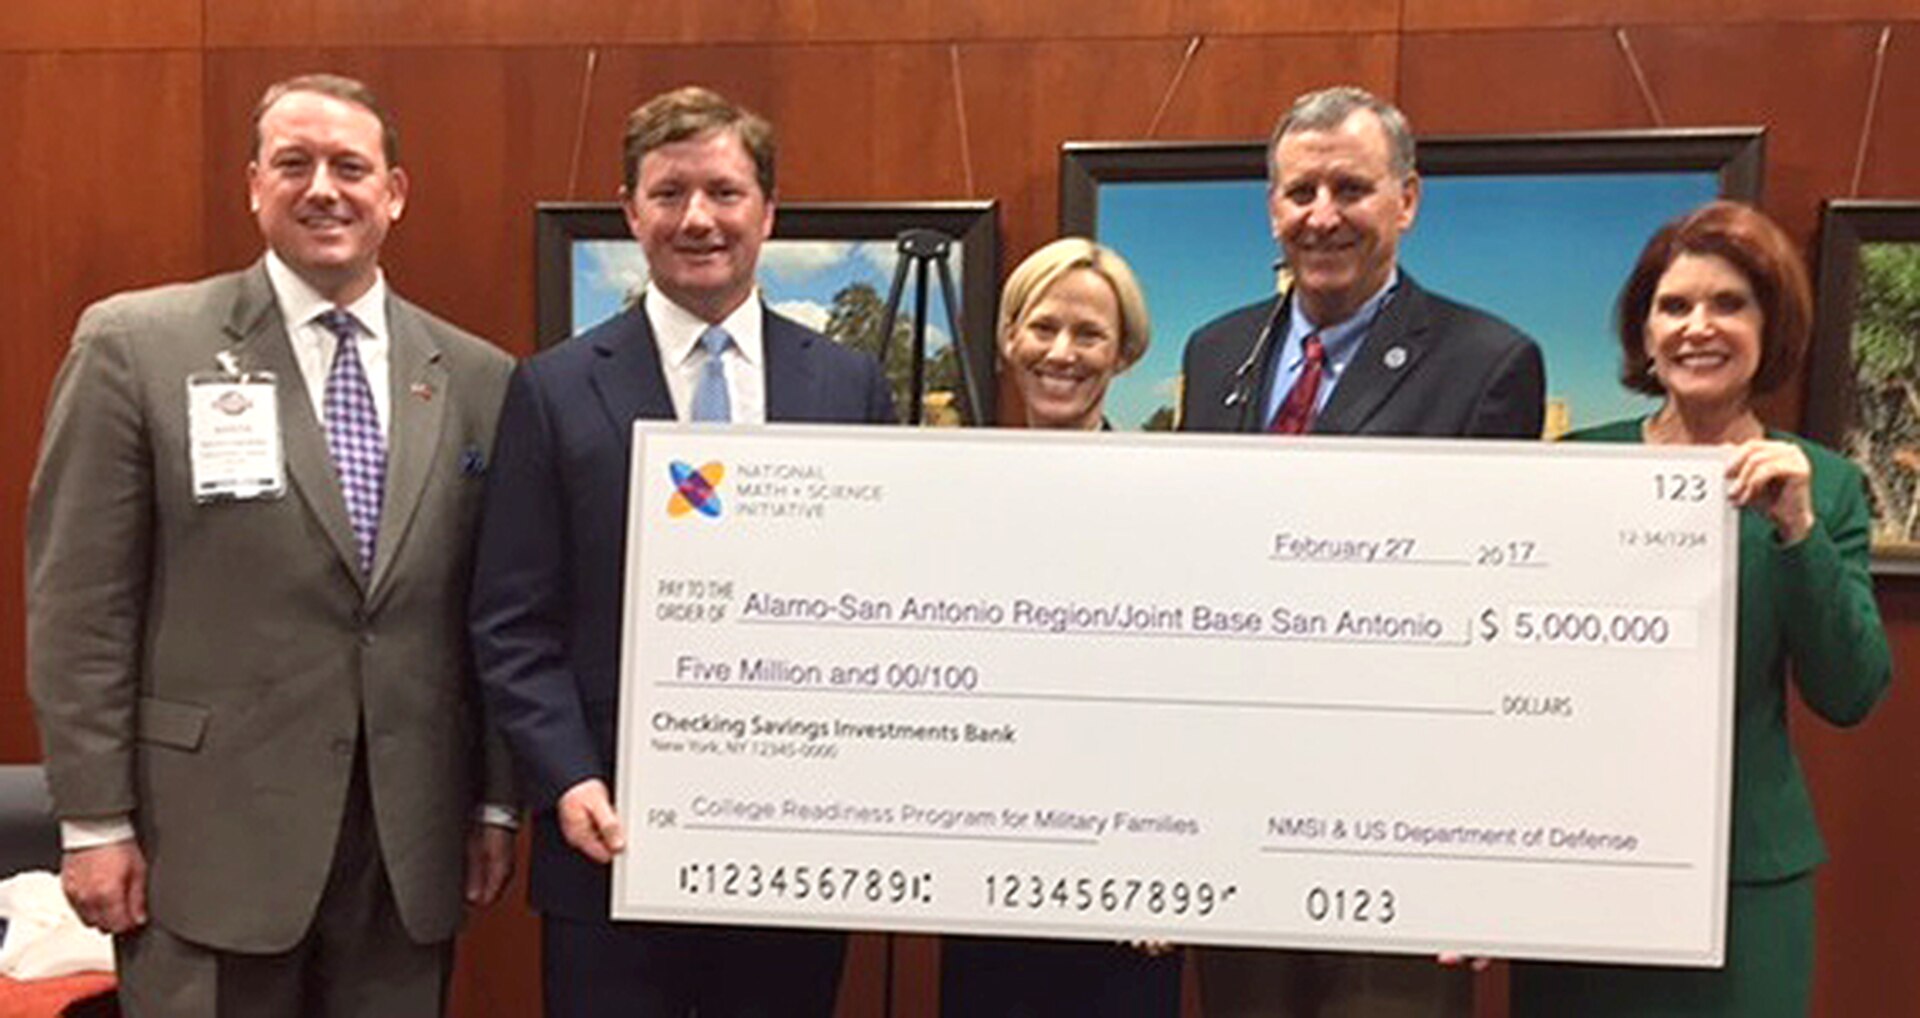 Marcus Ligenfelter, (left) president of the National Math and Science Initiative, or NMSI, presents a $5 million check Feb. 27 earmarked for science, technology, engineering and mathematics, or STEM, education in high schools serving military dependents at Joint Base San Antonio. This is the first round of funding and will be directed to individual school districts within JBSA to incentivize advanced placement classes. This is a Department of Defense-supported initiative to provide the successful model to the military. Also in photo from left are Rad Weaver, San Antonio Chamber of Commerce president; Brig. Gen. Heather Pringle, commander, 502nd Air Base Wing and JBSA; Chris Schuchart, Medina County judge and chair, Alamo Area Council of Government; and Diane Rath, AACOG executive director.